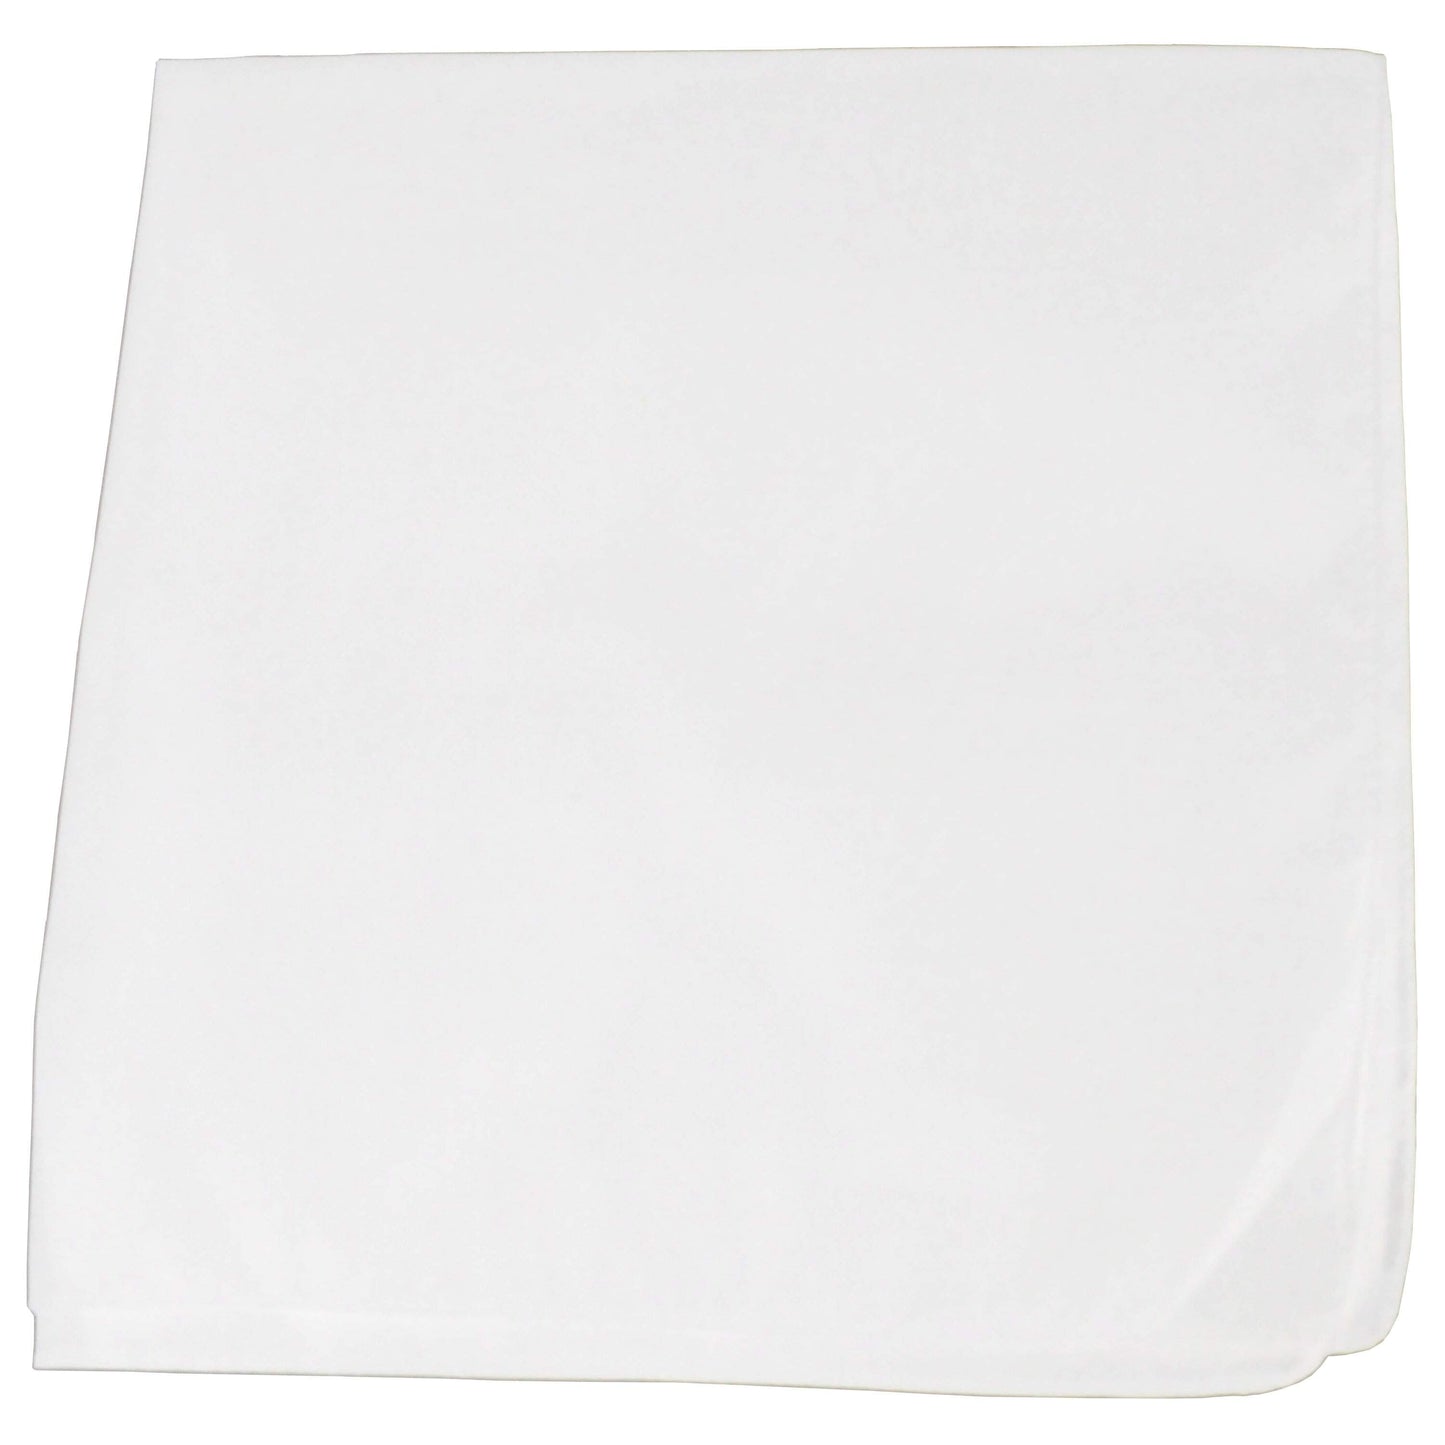 60 Pack Extra Large Cotton Plain Bandanas 27 x 27 Inches - Party and Decoration - Bulk Lot